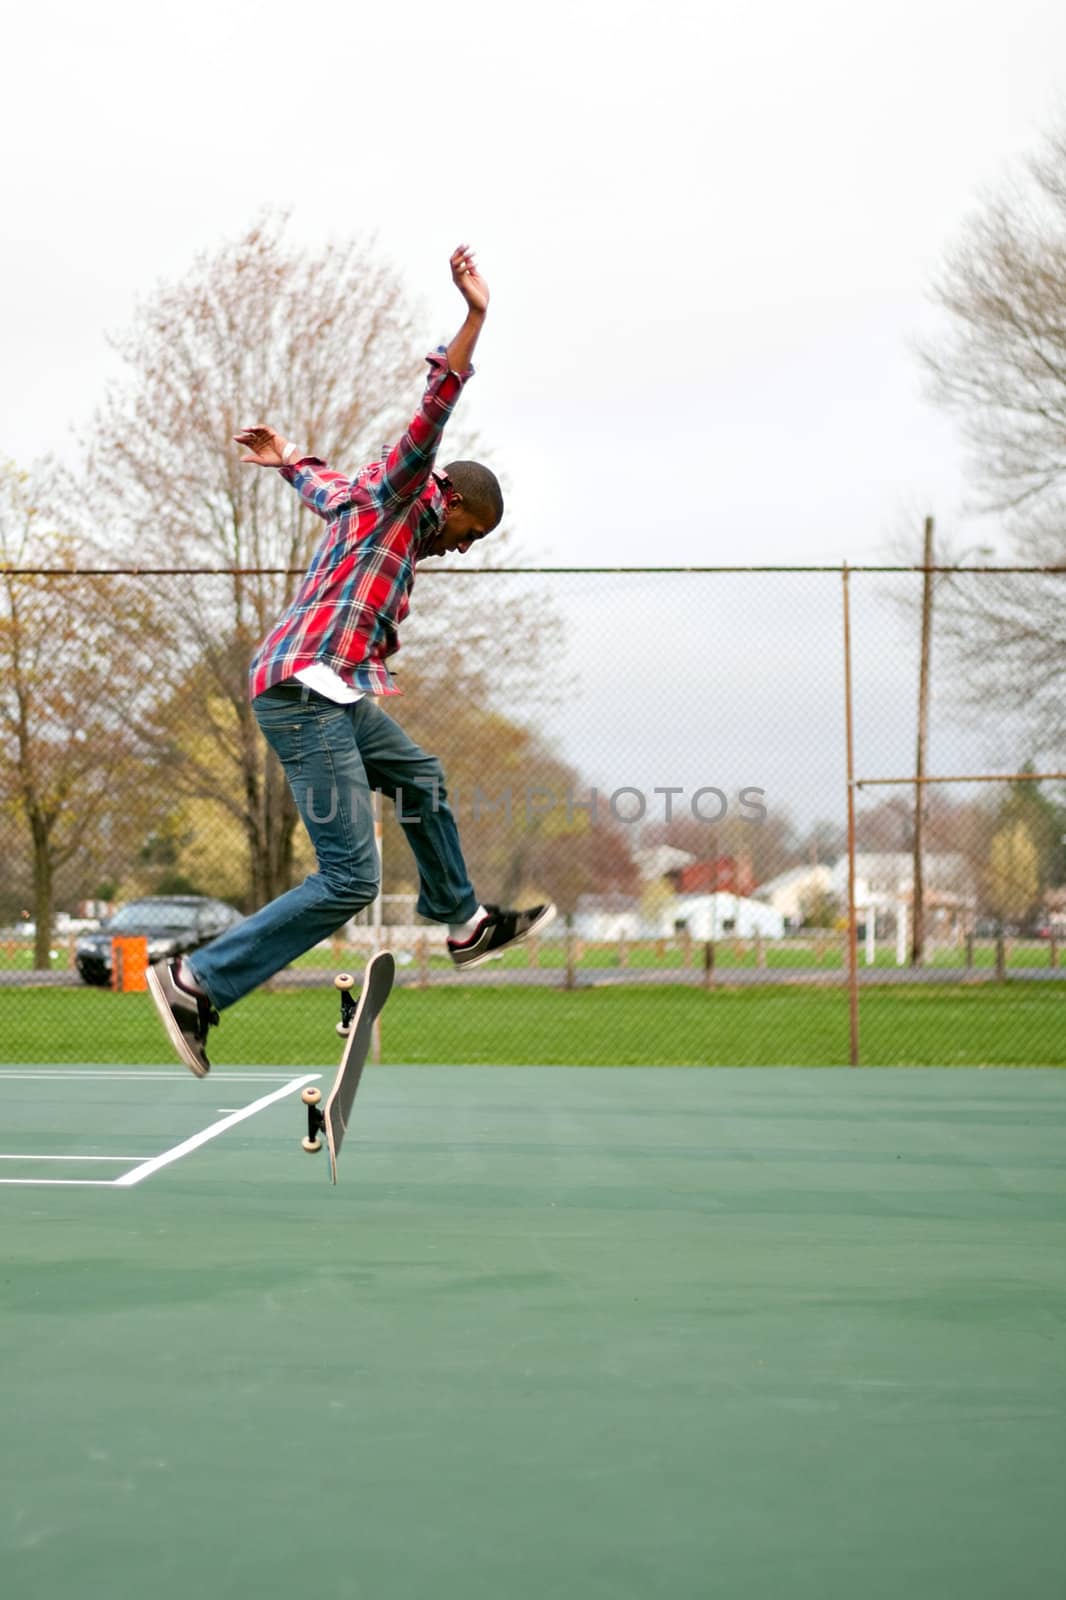 A skateboarder performing jumps or ollies on some tennis courts.  Slight motion blur showing the movement on the arms and legs.